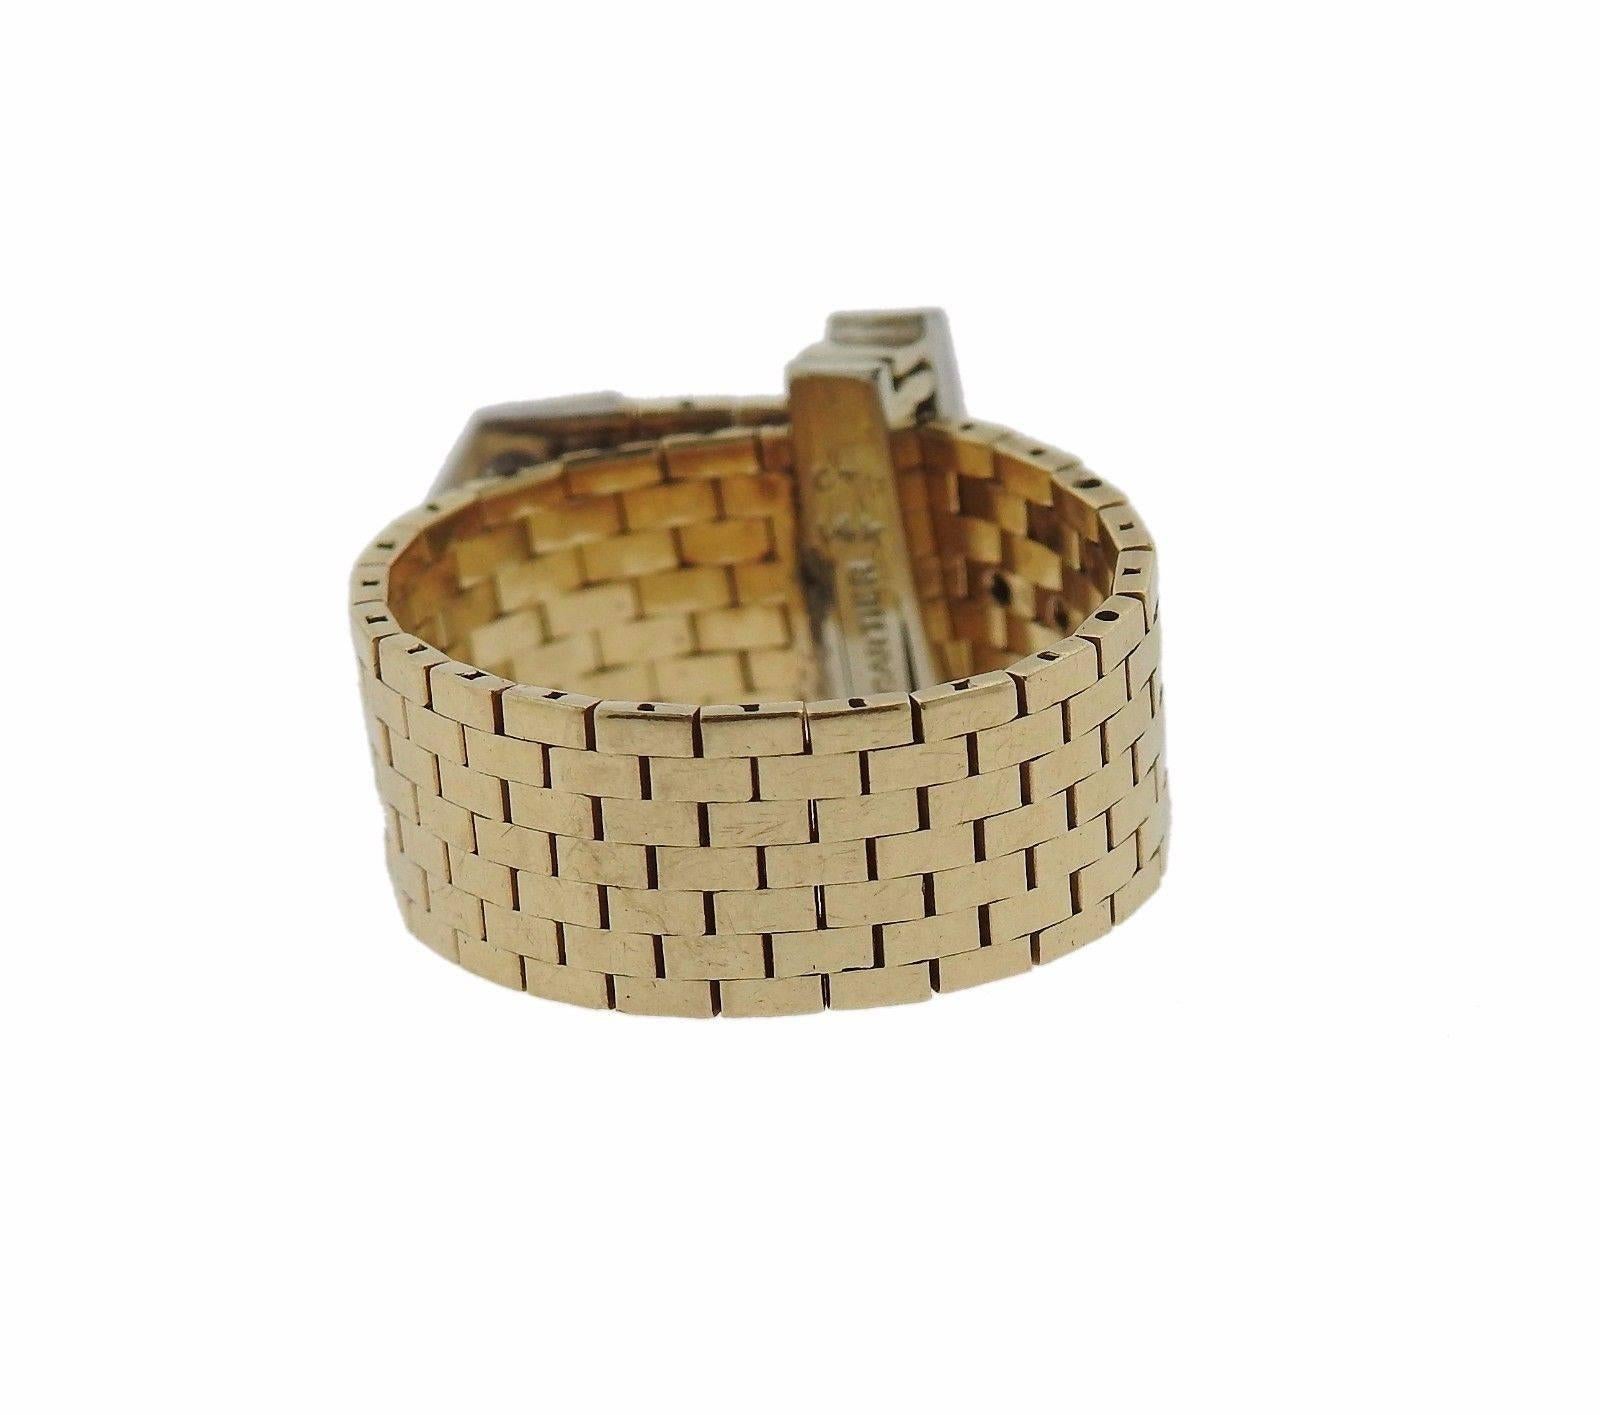 A 14k gold buckle ring crafted by Cartier in the 1940s.  It is set with approximately 0.35ctw of G/VS diamonds.  The ring is adjustable in size from a 4 1/4 to a 9.  The ring is 8.2mm wide and weighs 8 grams.  Marked: Cartier, 14k.